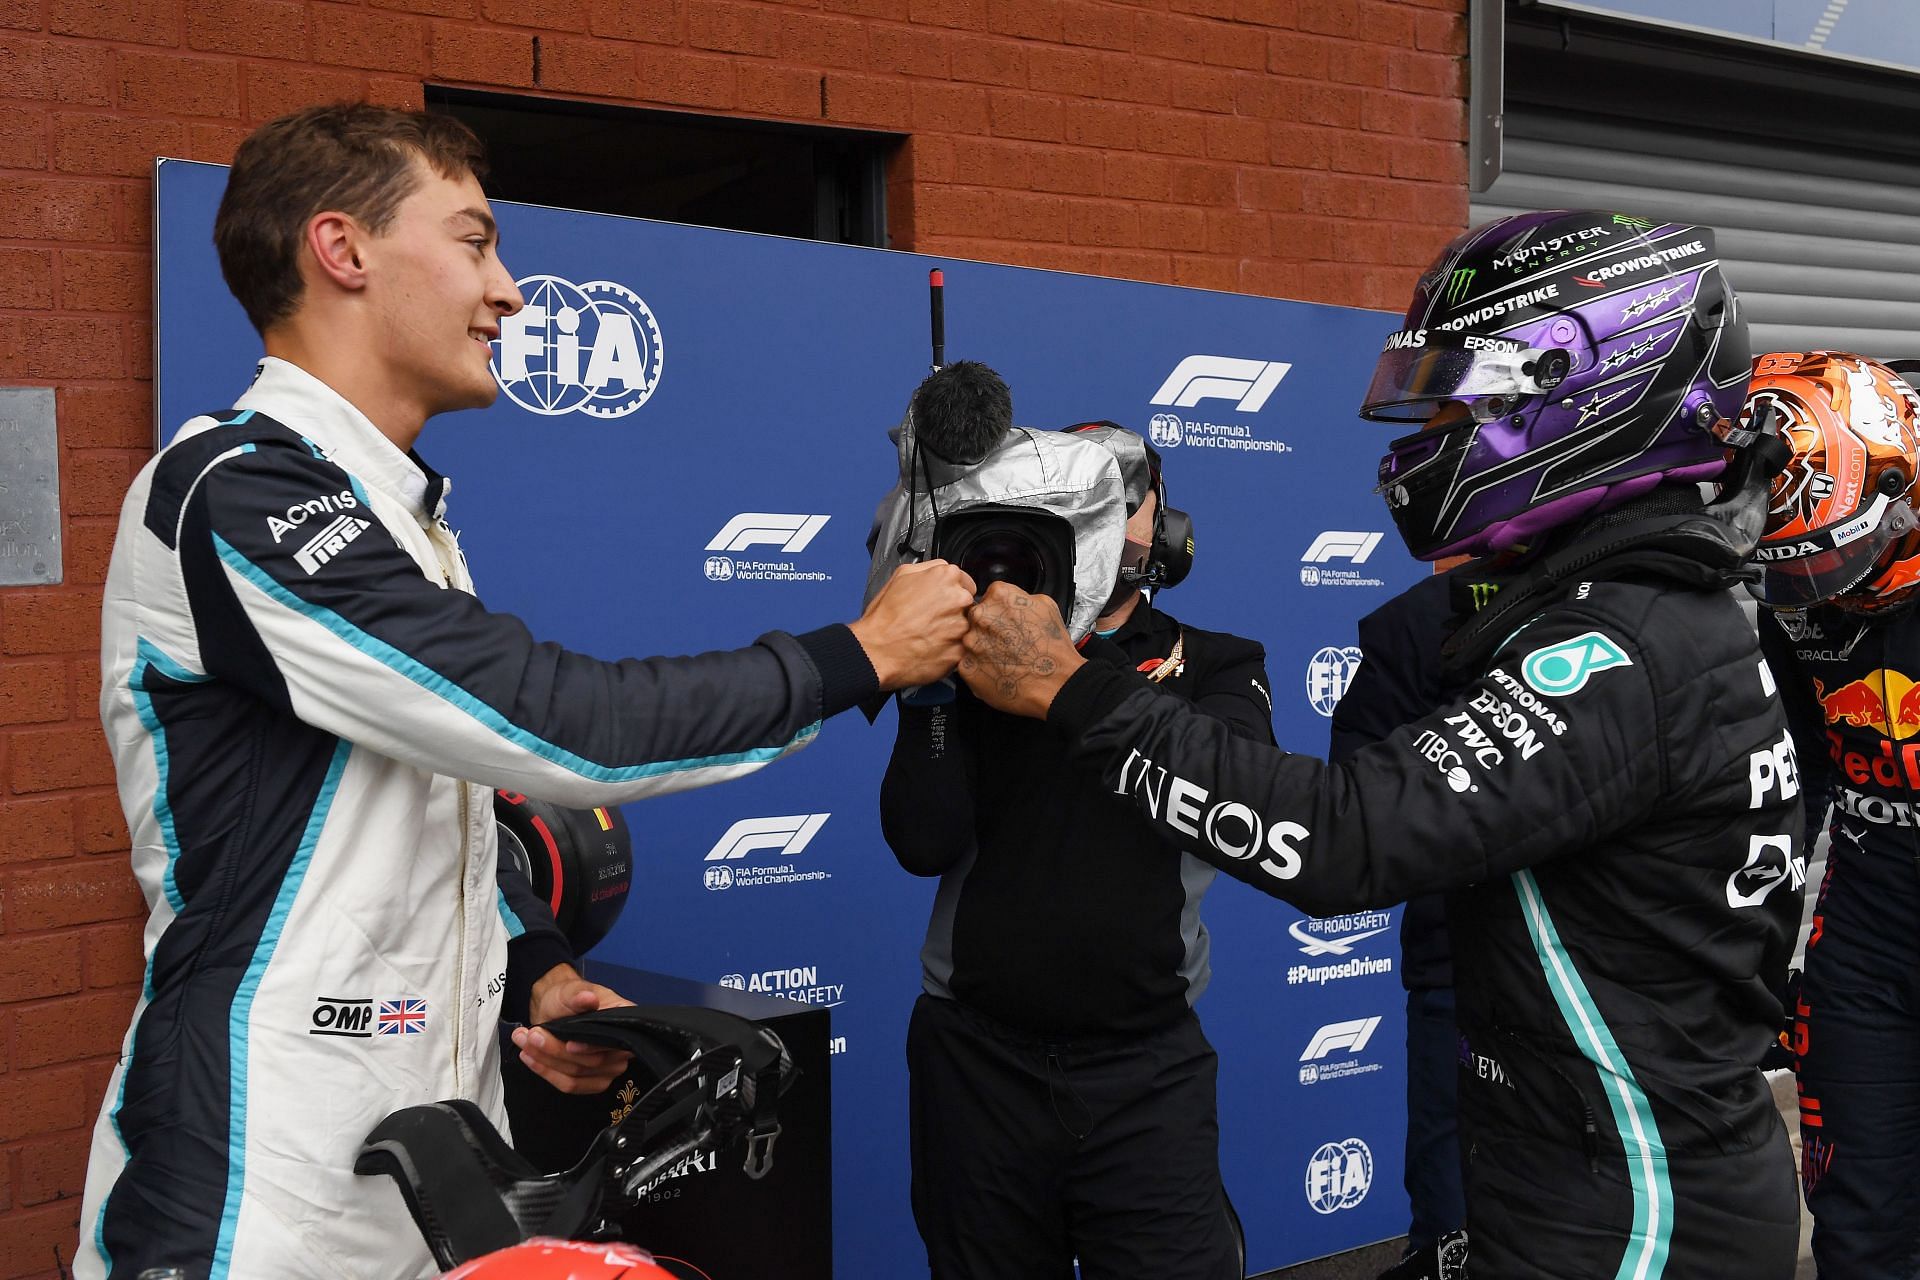 The George Russell-Lewis Hamilton partnership could lead to fireworks at Mercedes